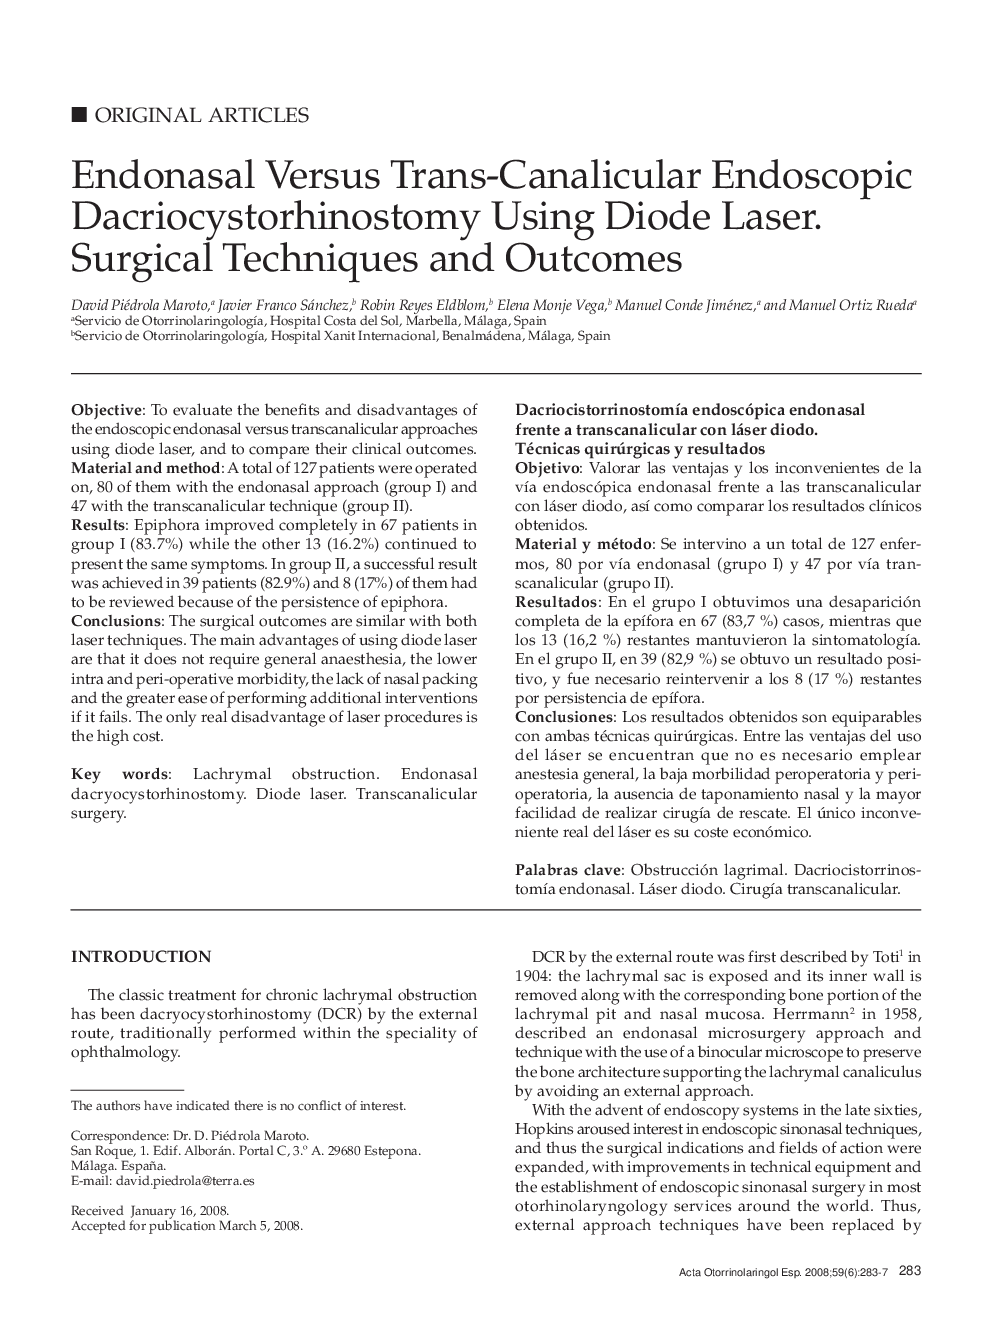 Endonasal Versus Trans-Canalicular Endoscopic Dacriocystorhinostomy Using Diode Laser. Surgical Techniques and Outcomes